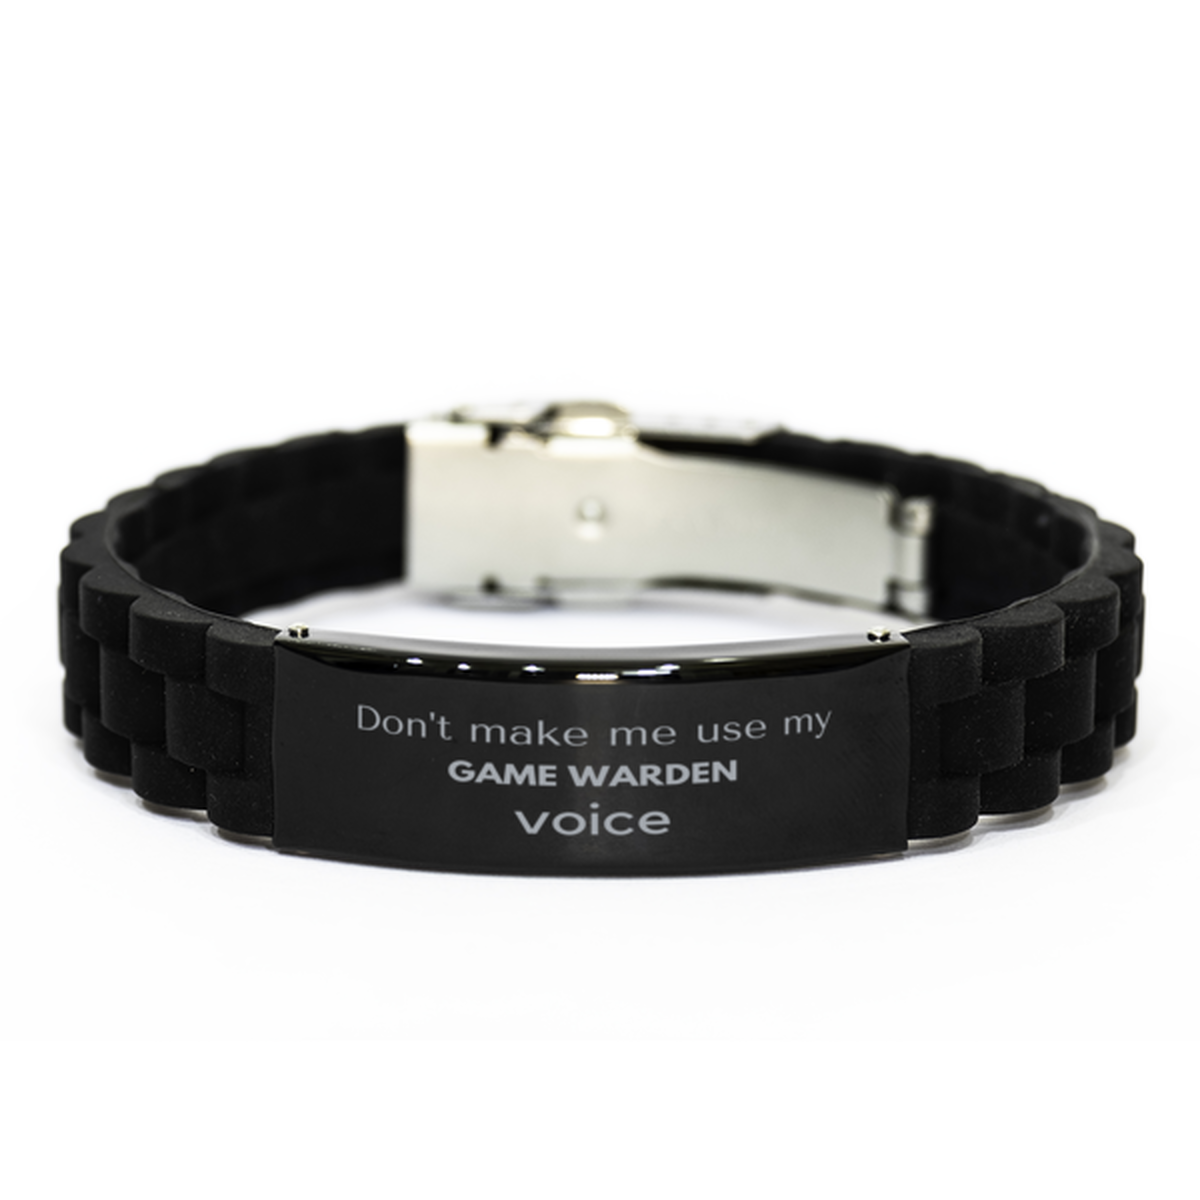 Don't make me use my Game Warden voice, Sarcasm Game Warden Gifts, Christmas Game Warden Black Glidelock Clasp Bracelet Birthday Unique Gifts For Game Warden Coworkers, Men, Women, Colleague, Friends